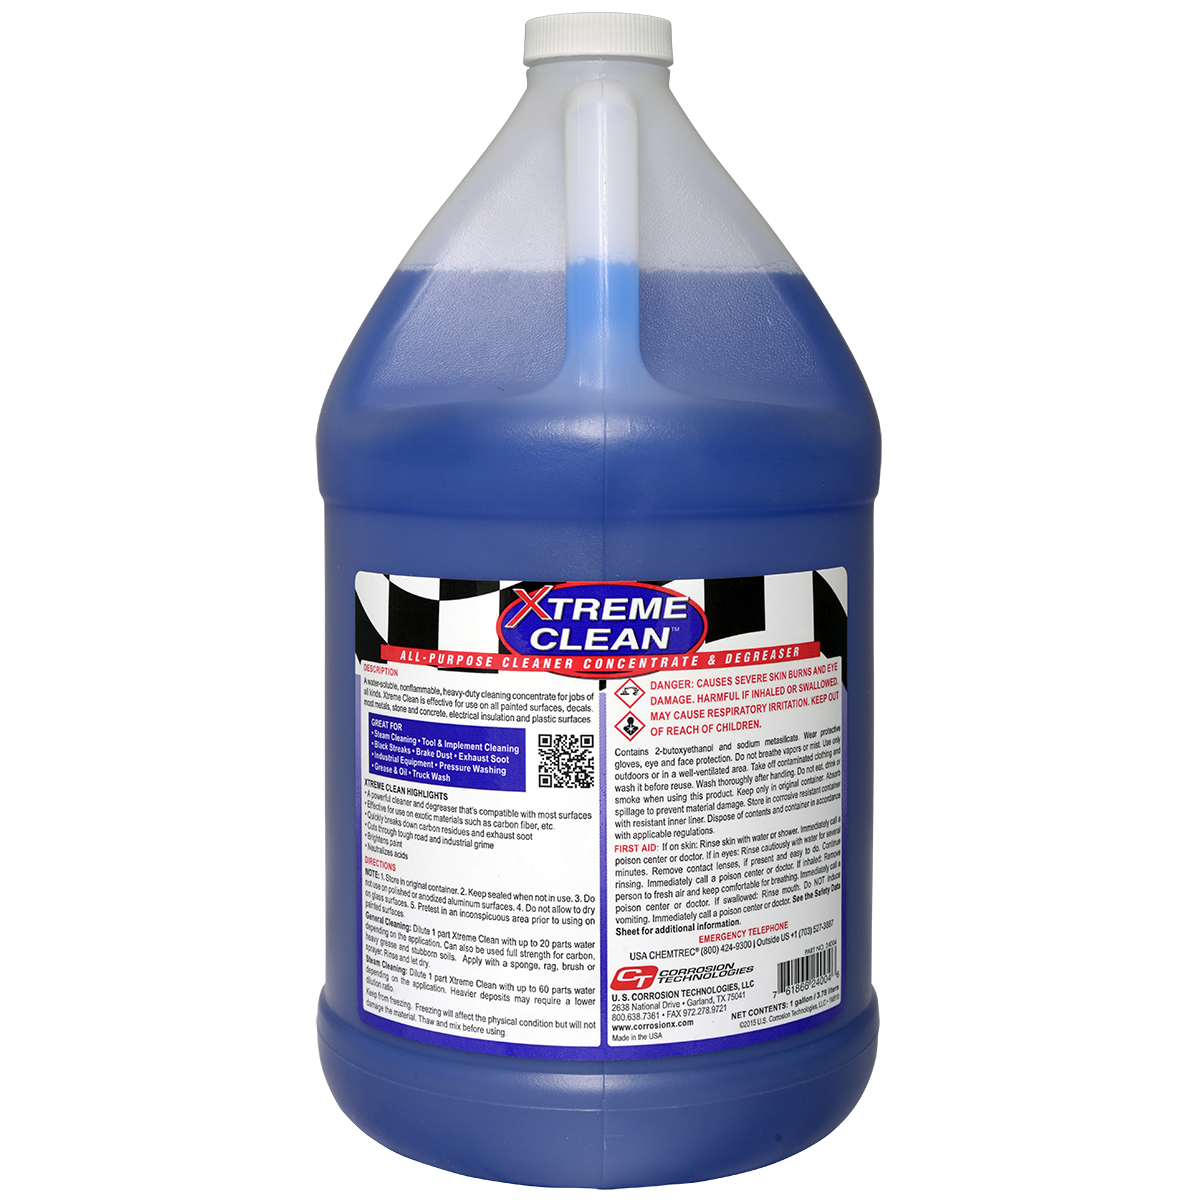 Powerful Nonflammable Contact Cleaner